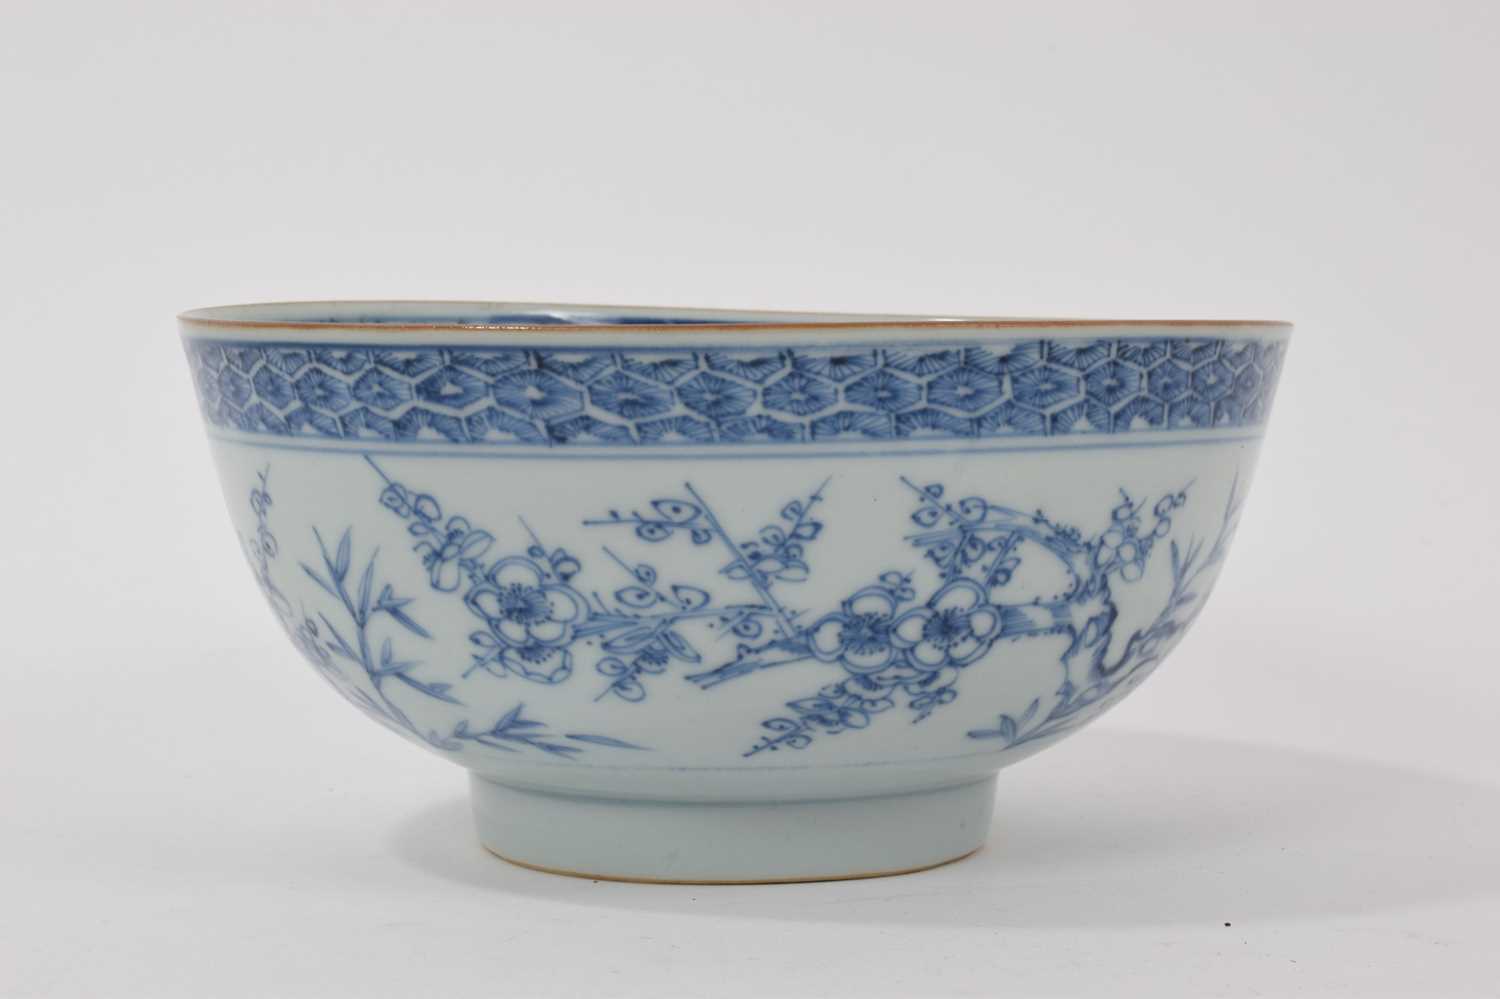 Lot 61 - 18th century Chinese export blue and white round bowl